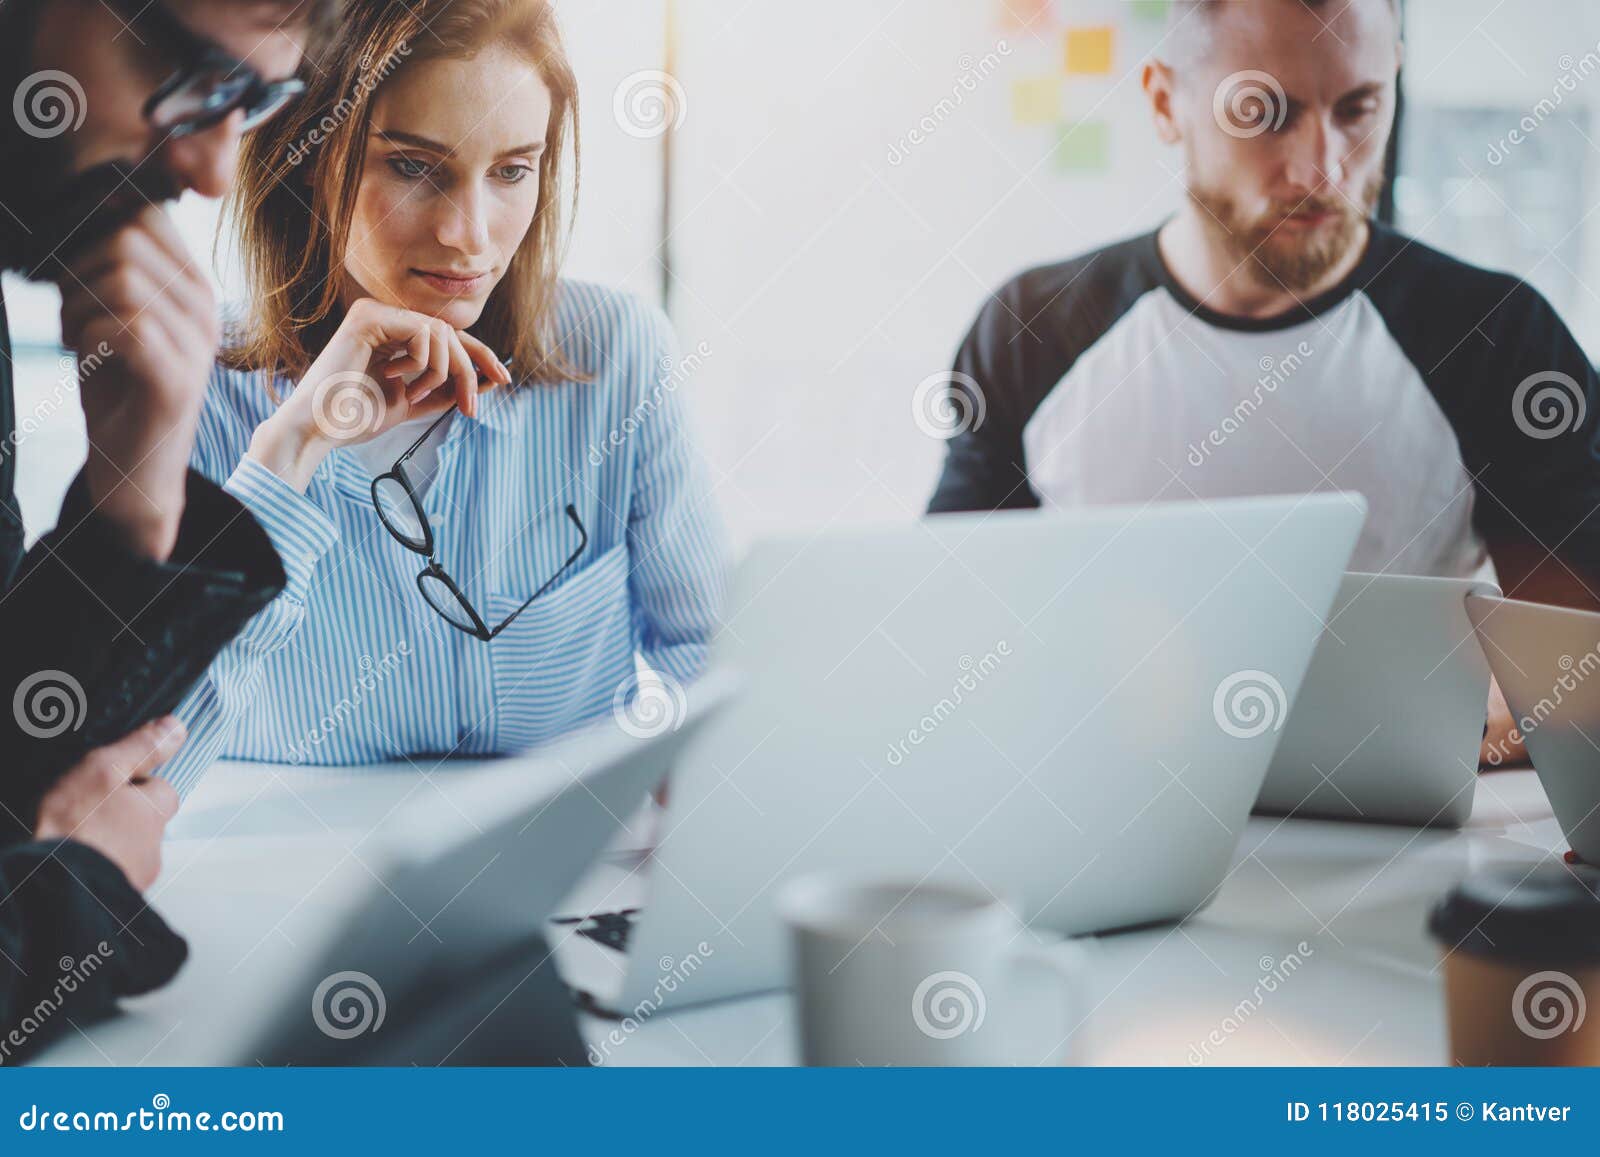 business meeting concept.analyze business plans,using laptop.blurred background.horizontal.